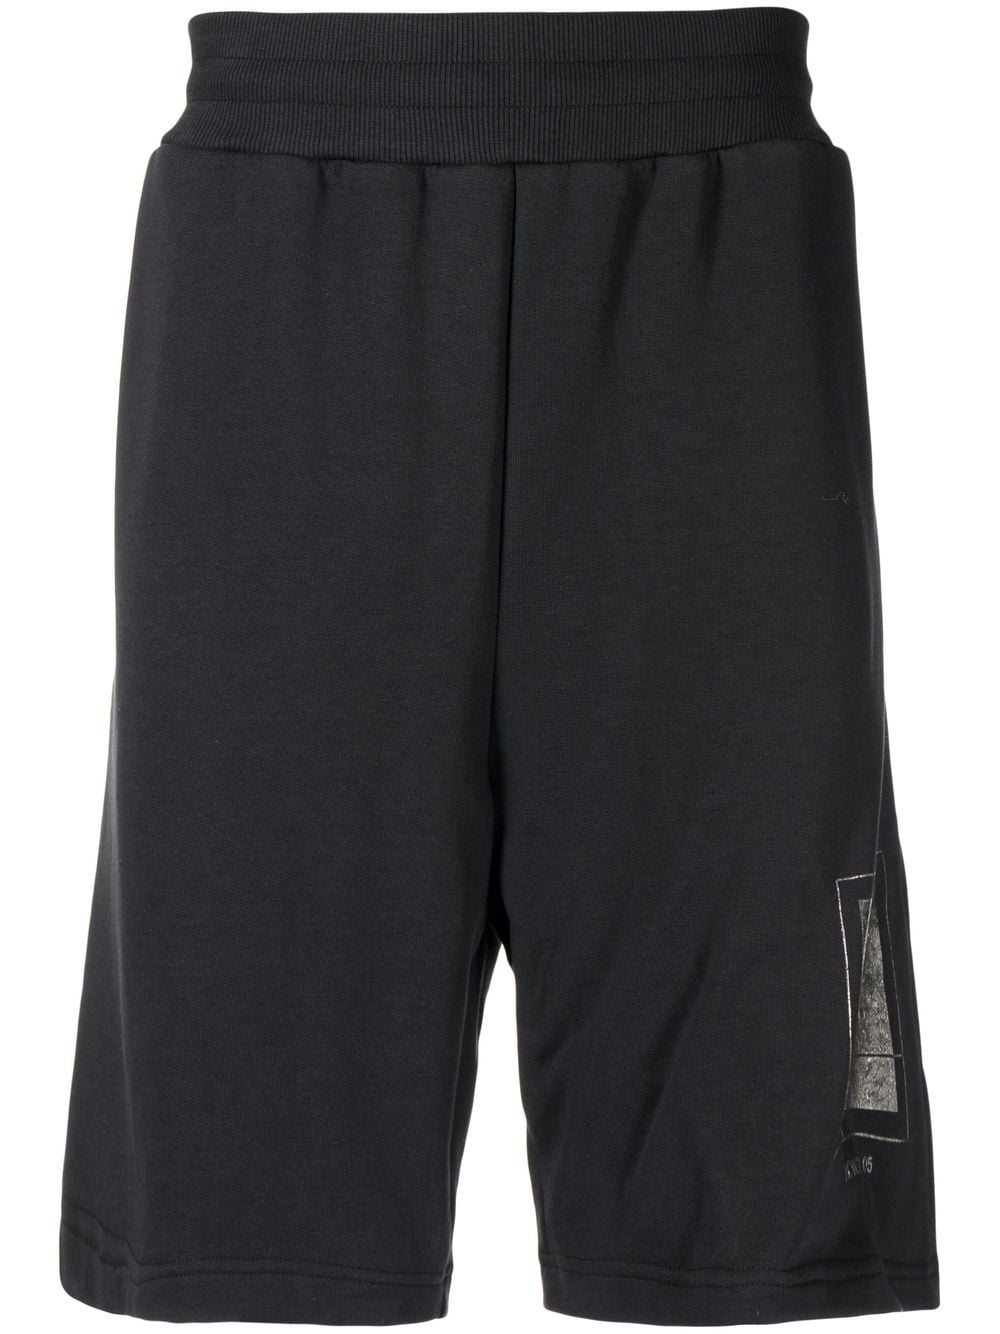 A-COLD-WALL* Foil Grid track shorts - Black von A-COLD-WALL*